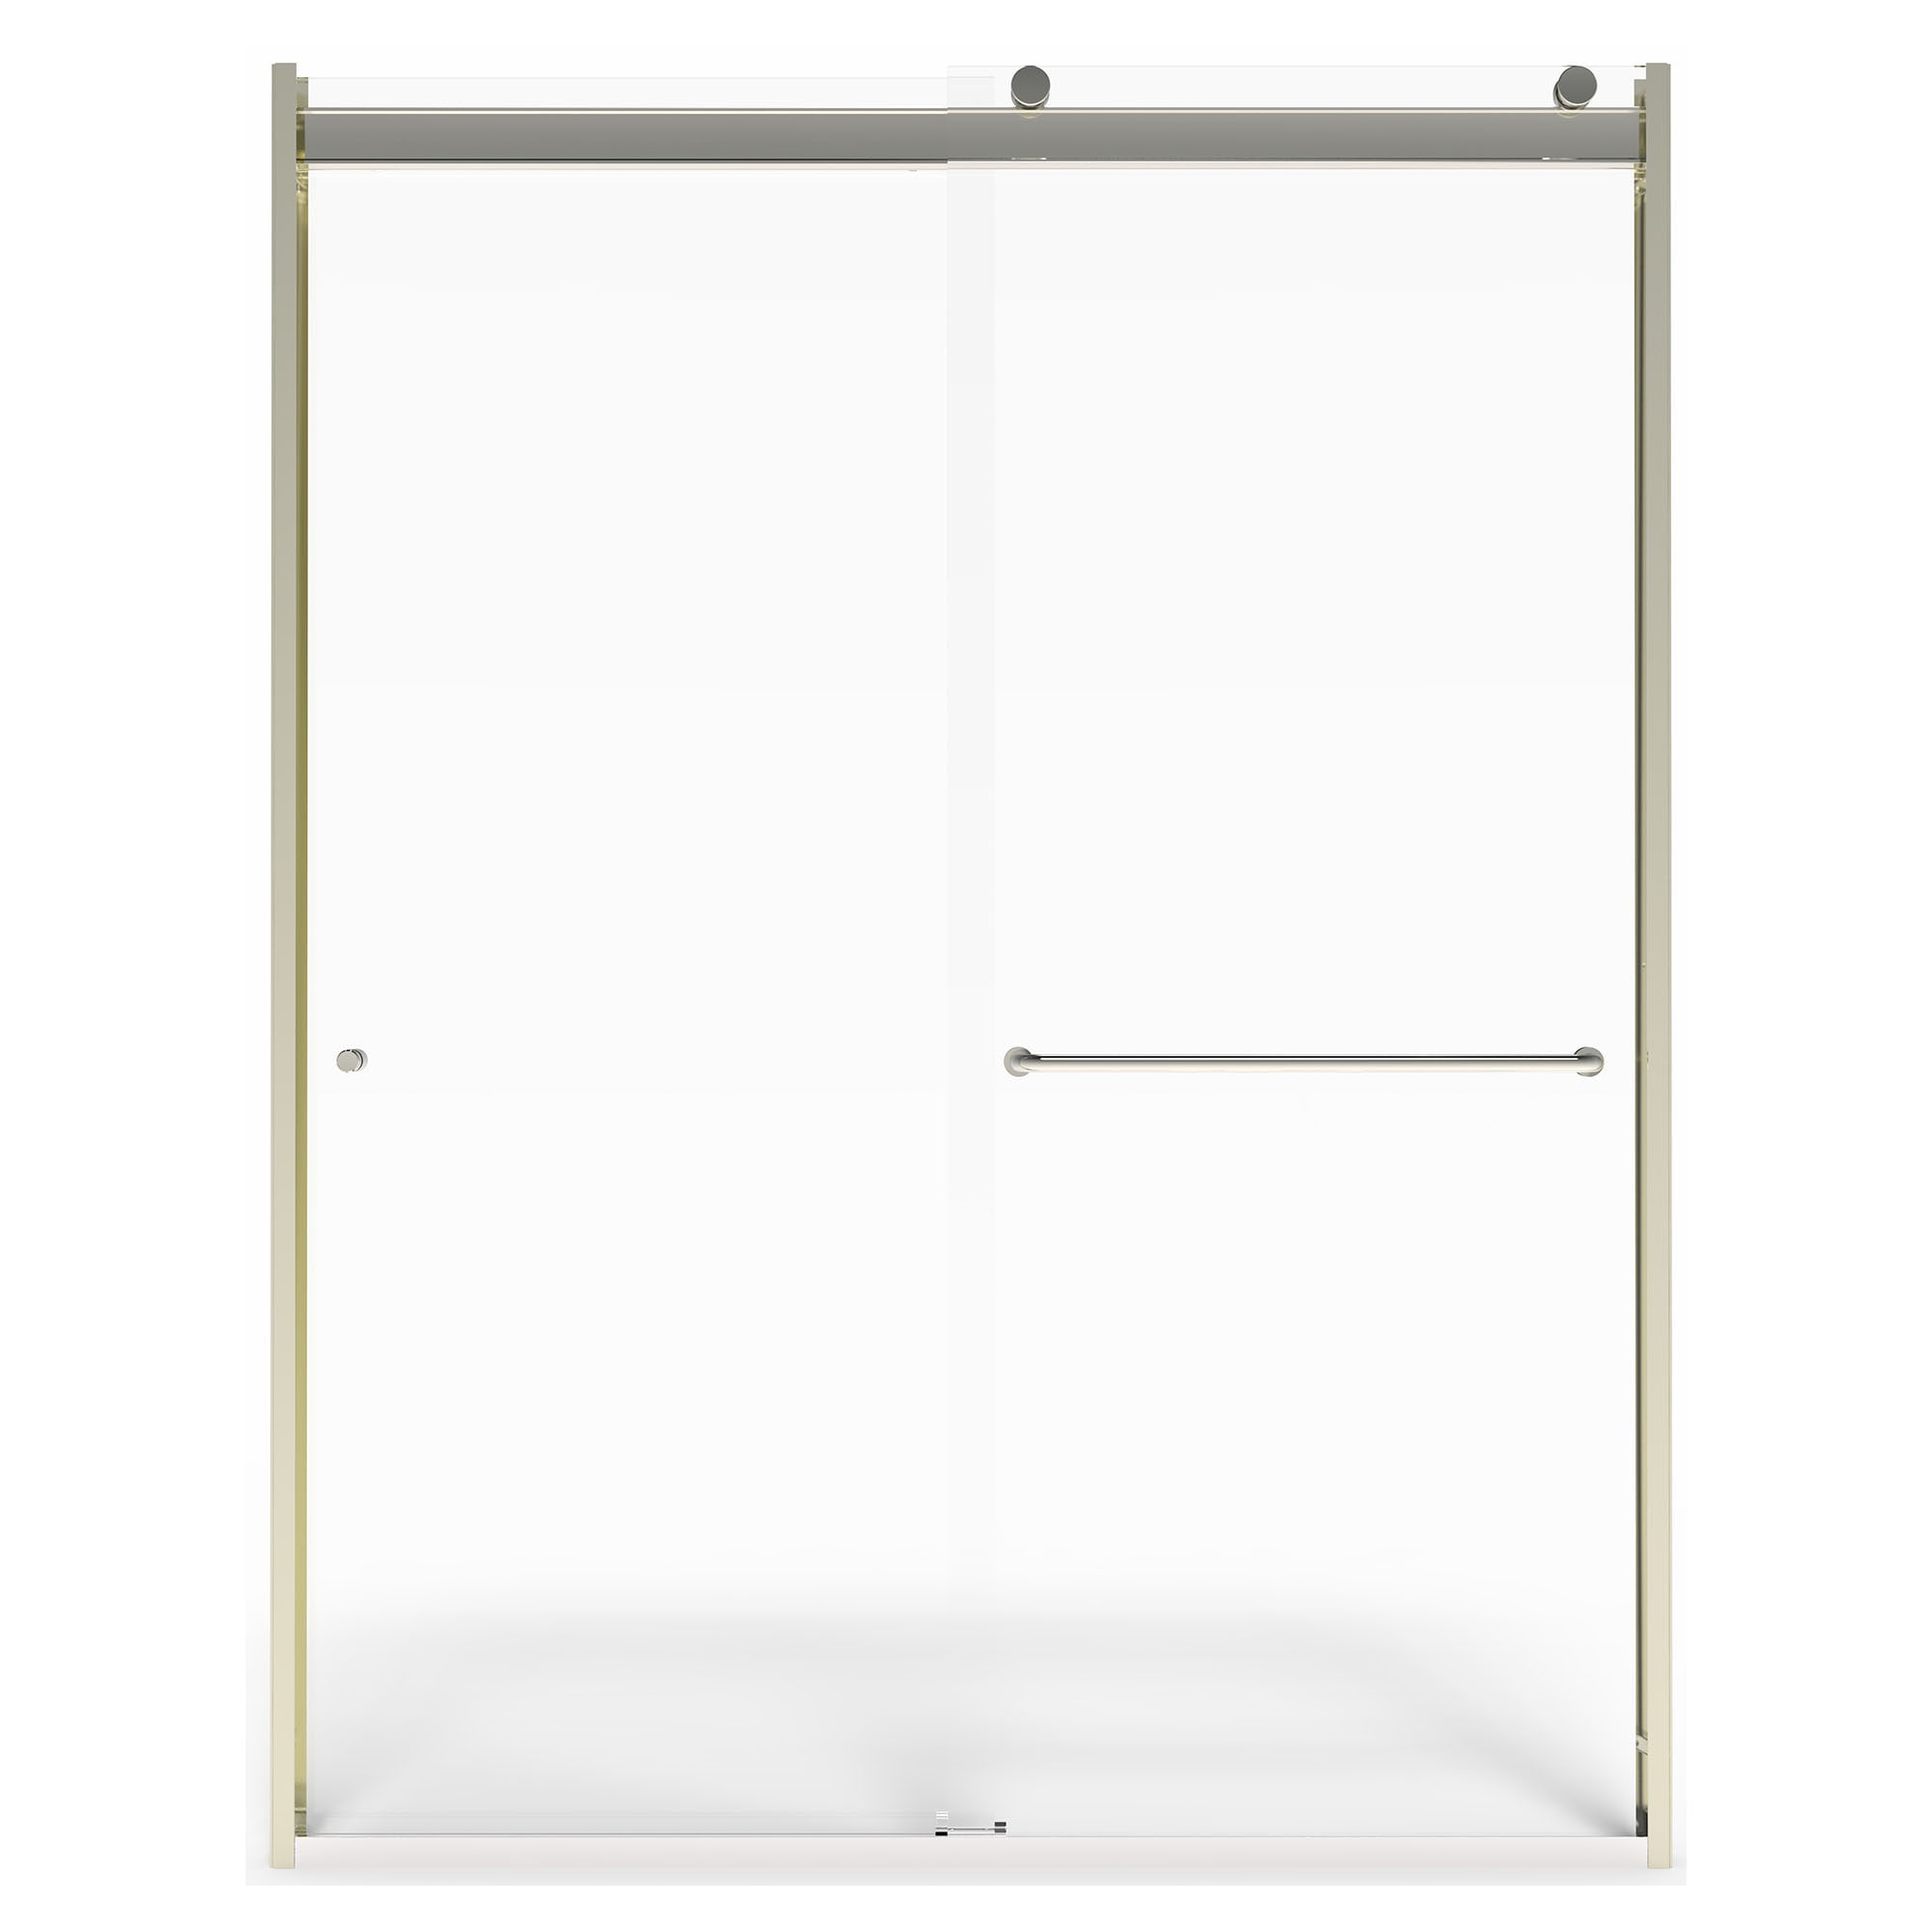 Brushed Nickel 44-in to 48-in x 70-in Semi-frameless Sliding Soft Close Shower Door | - American Standard AM00821400.006